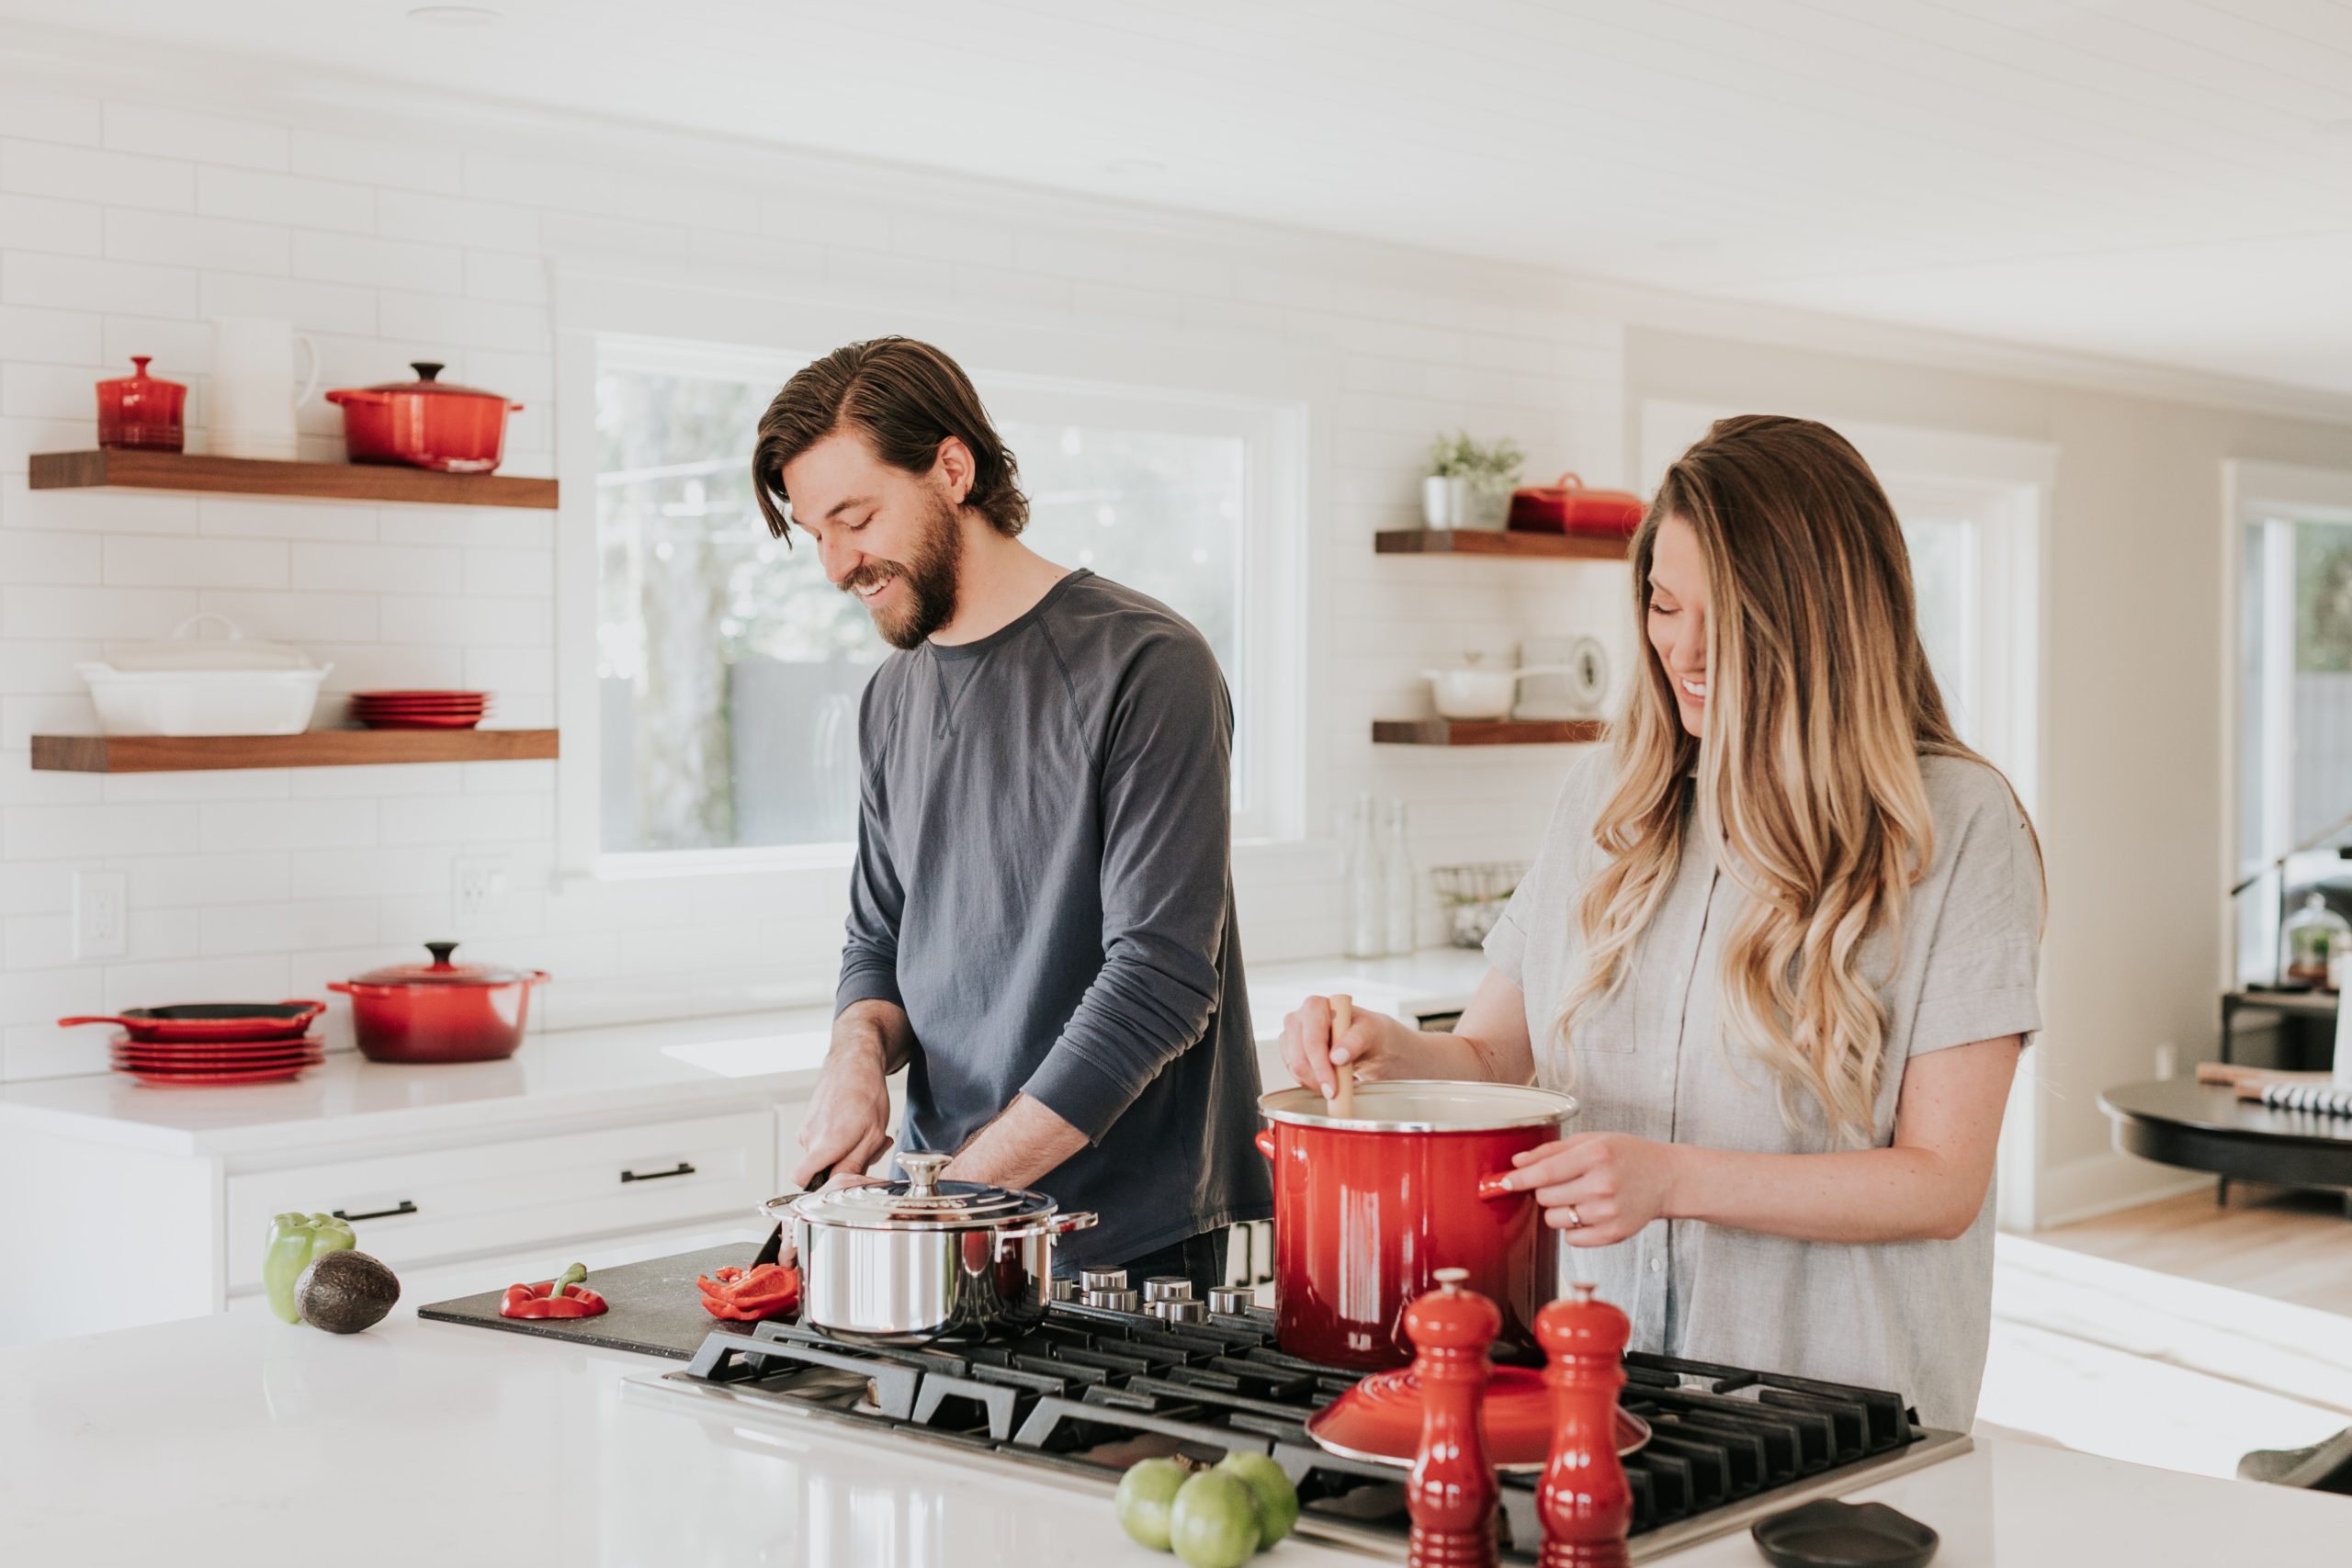 A man smiles as he chops a tomato on the kitchen counter next to his wife who smiles as she's stirring a pot on the stove.